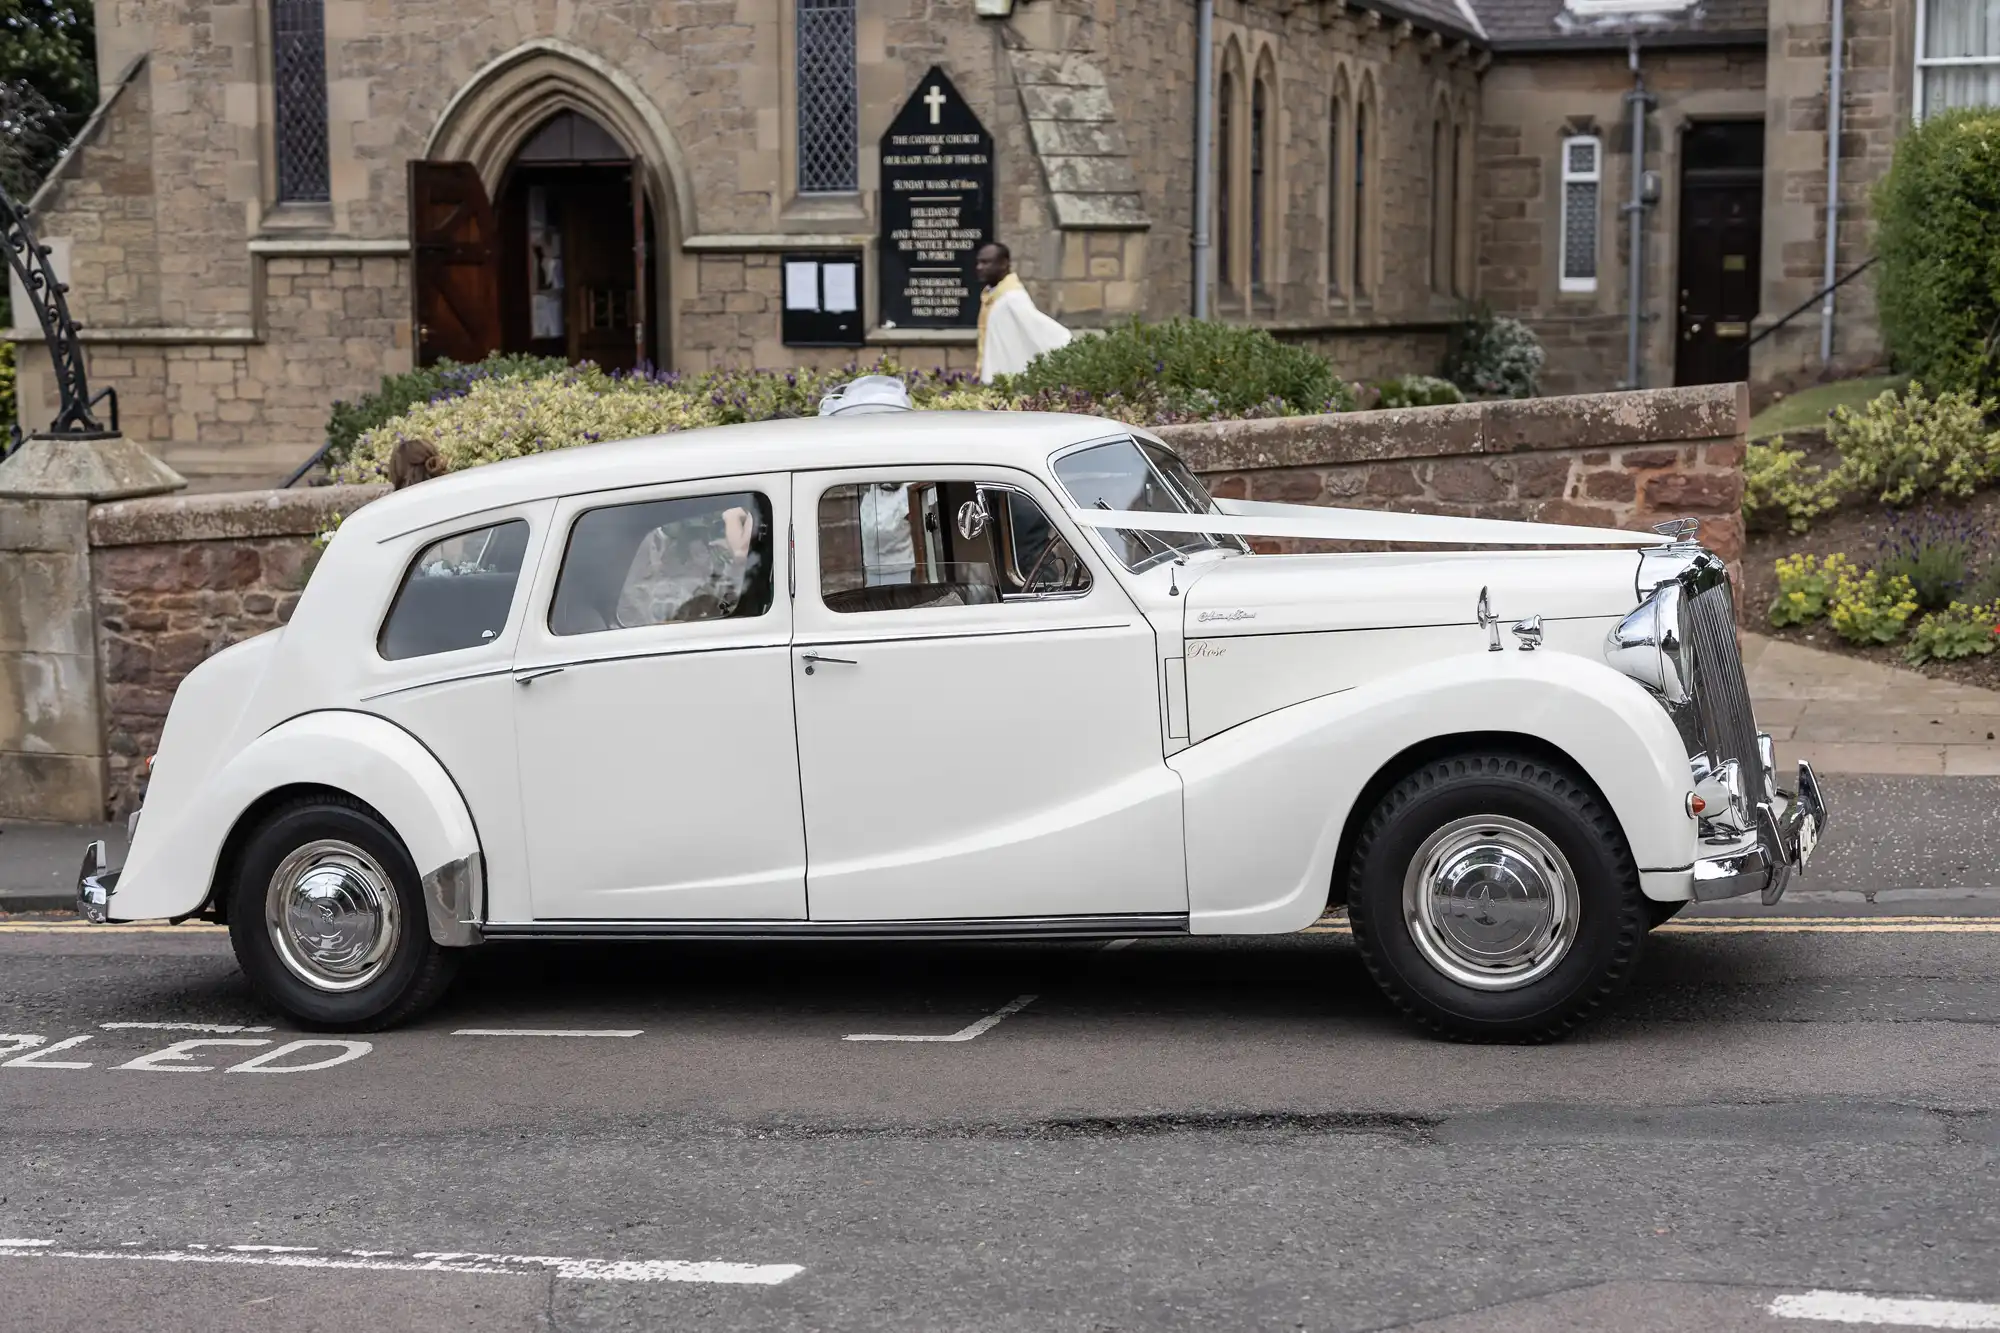 A vintage white Rolls-Royce parked on a street, with a bride visible in the rear seat, looking out of the window.